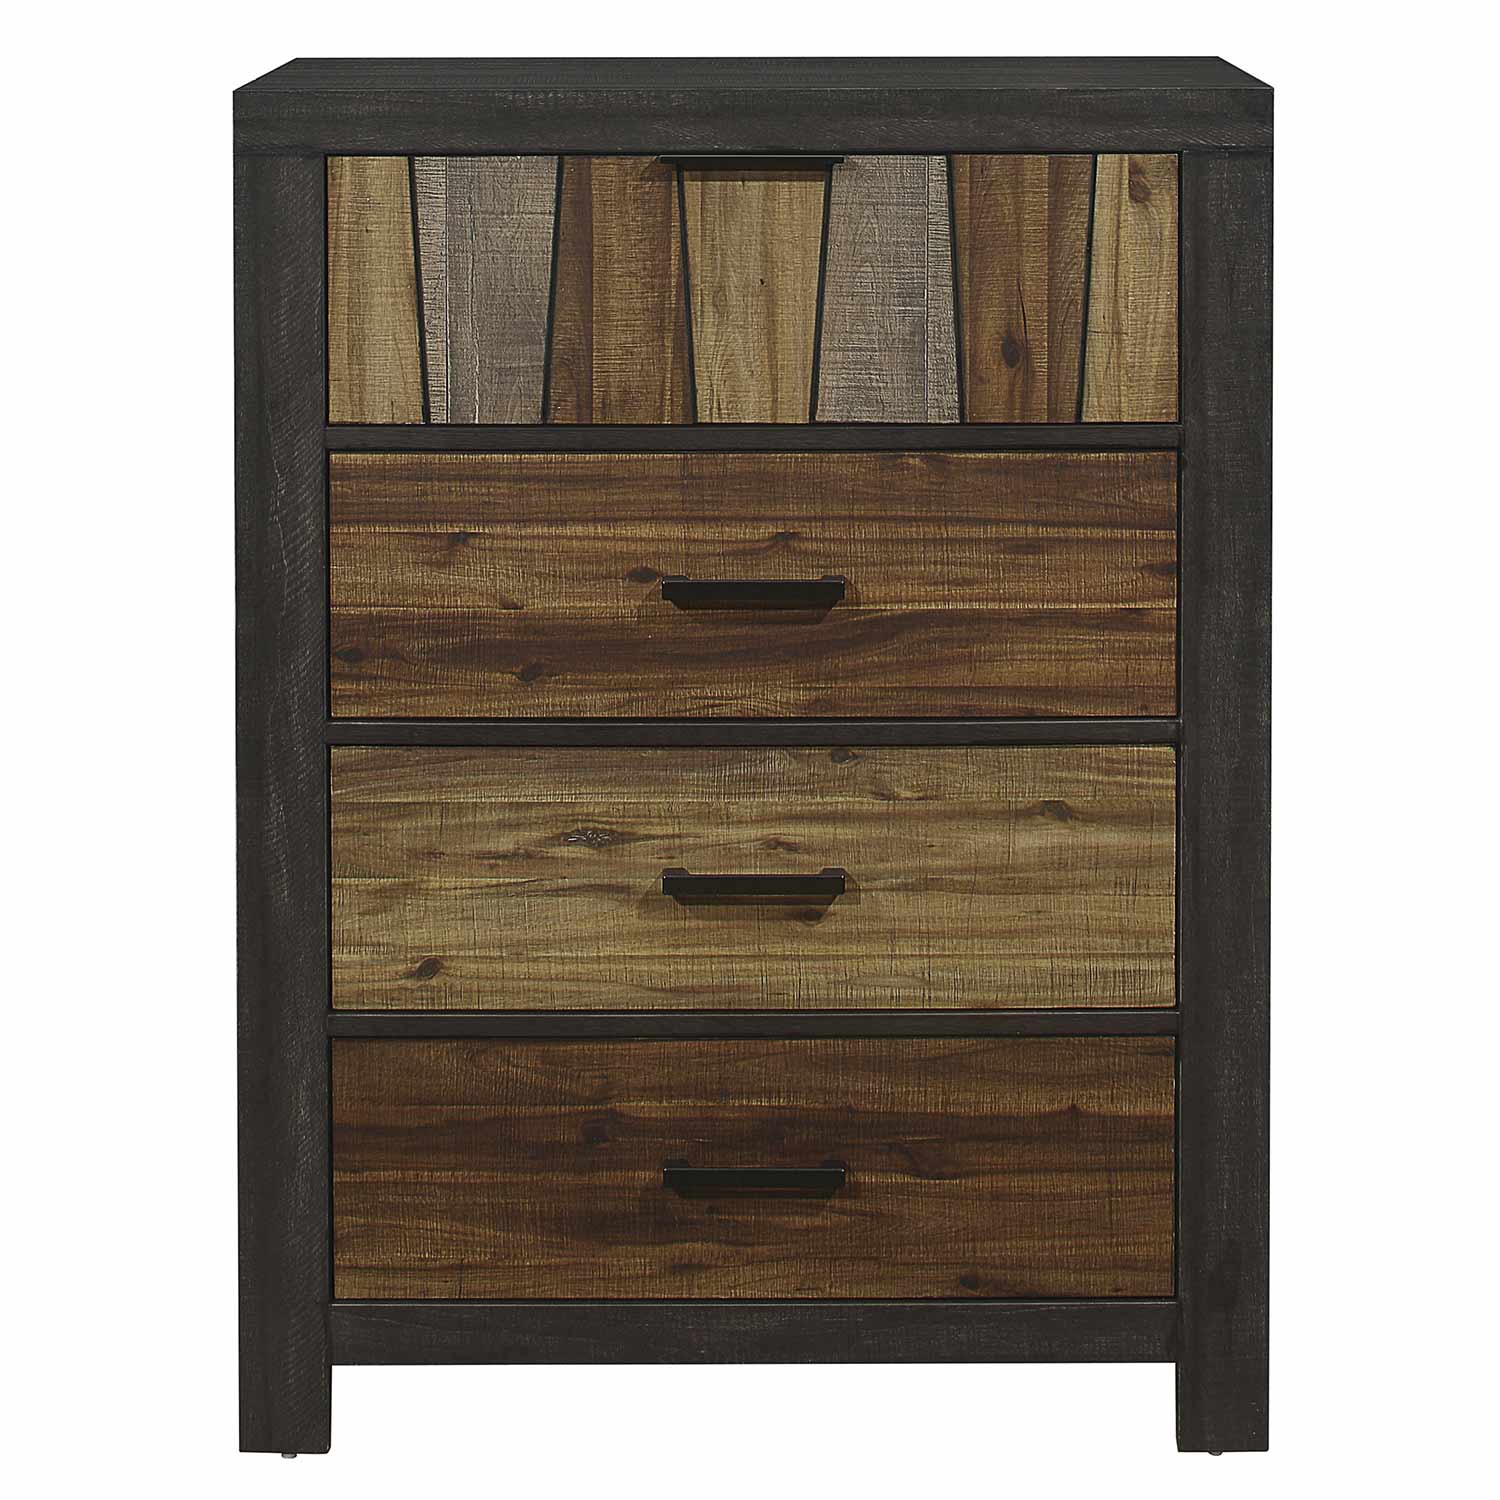 Homelegance Cooper Chest - Wire-brushed multi-tone